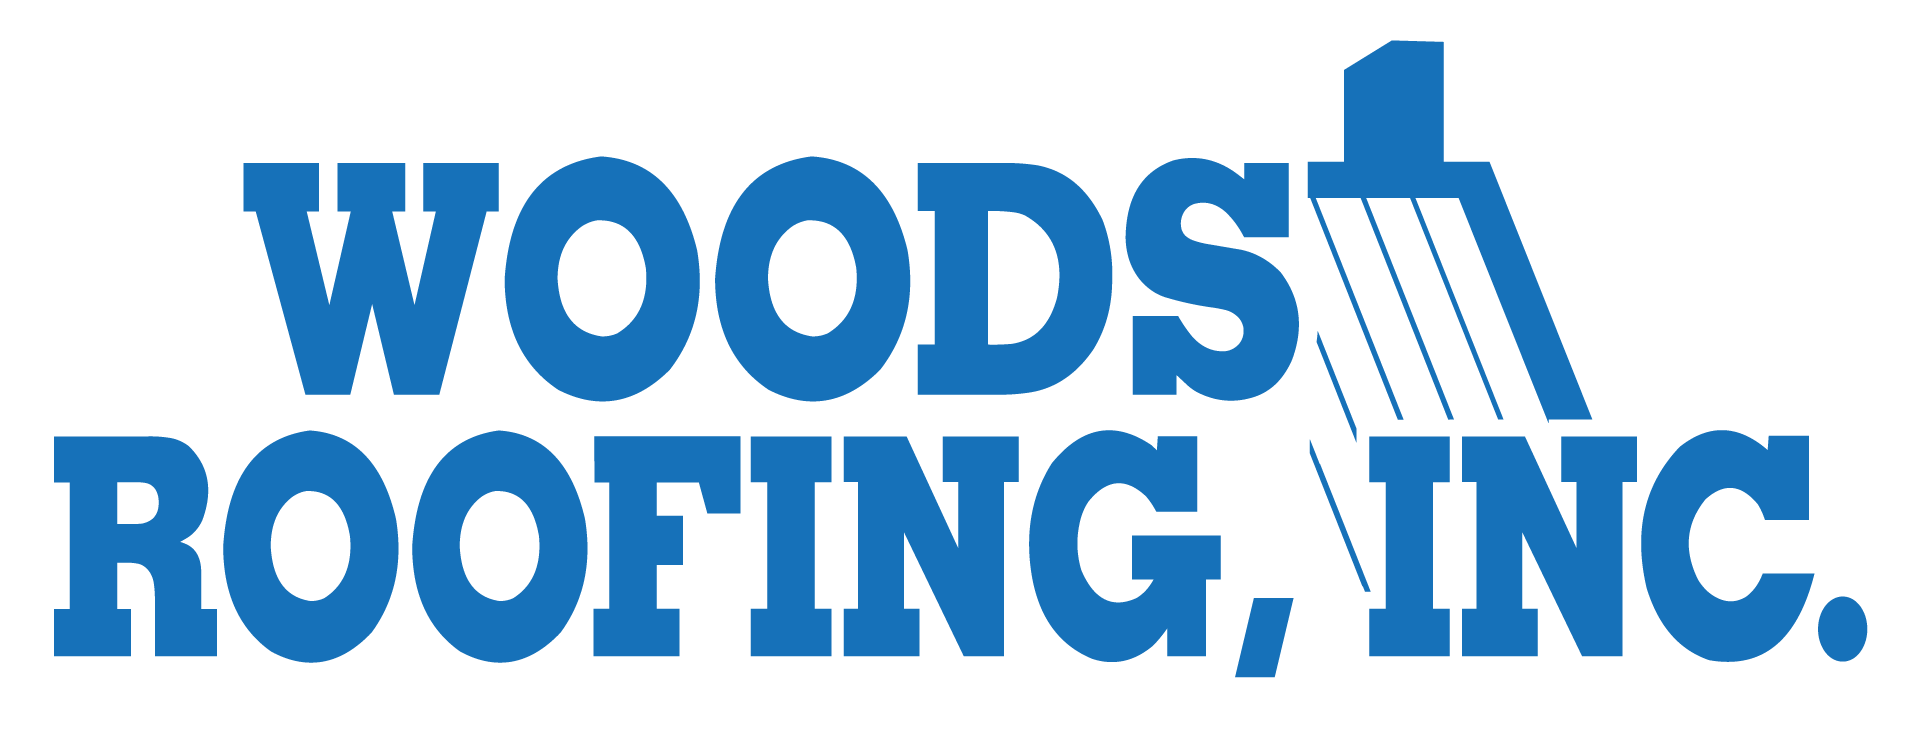 Woods Roofing, Inc roofing company in South Dakota